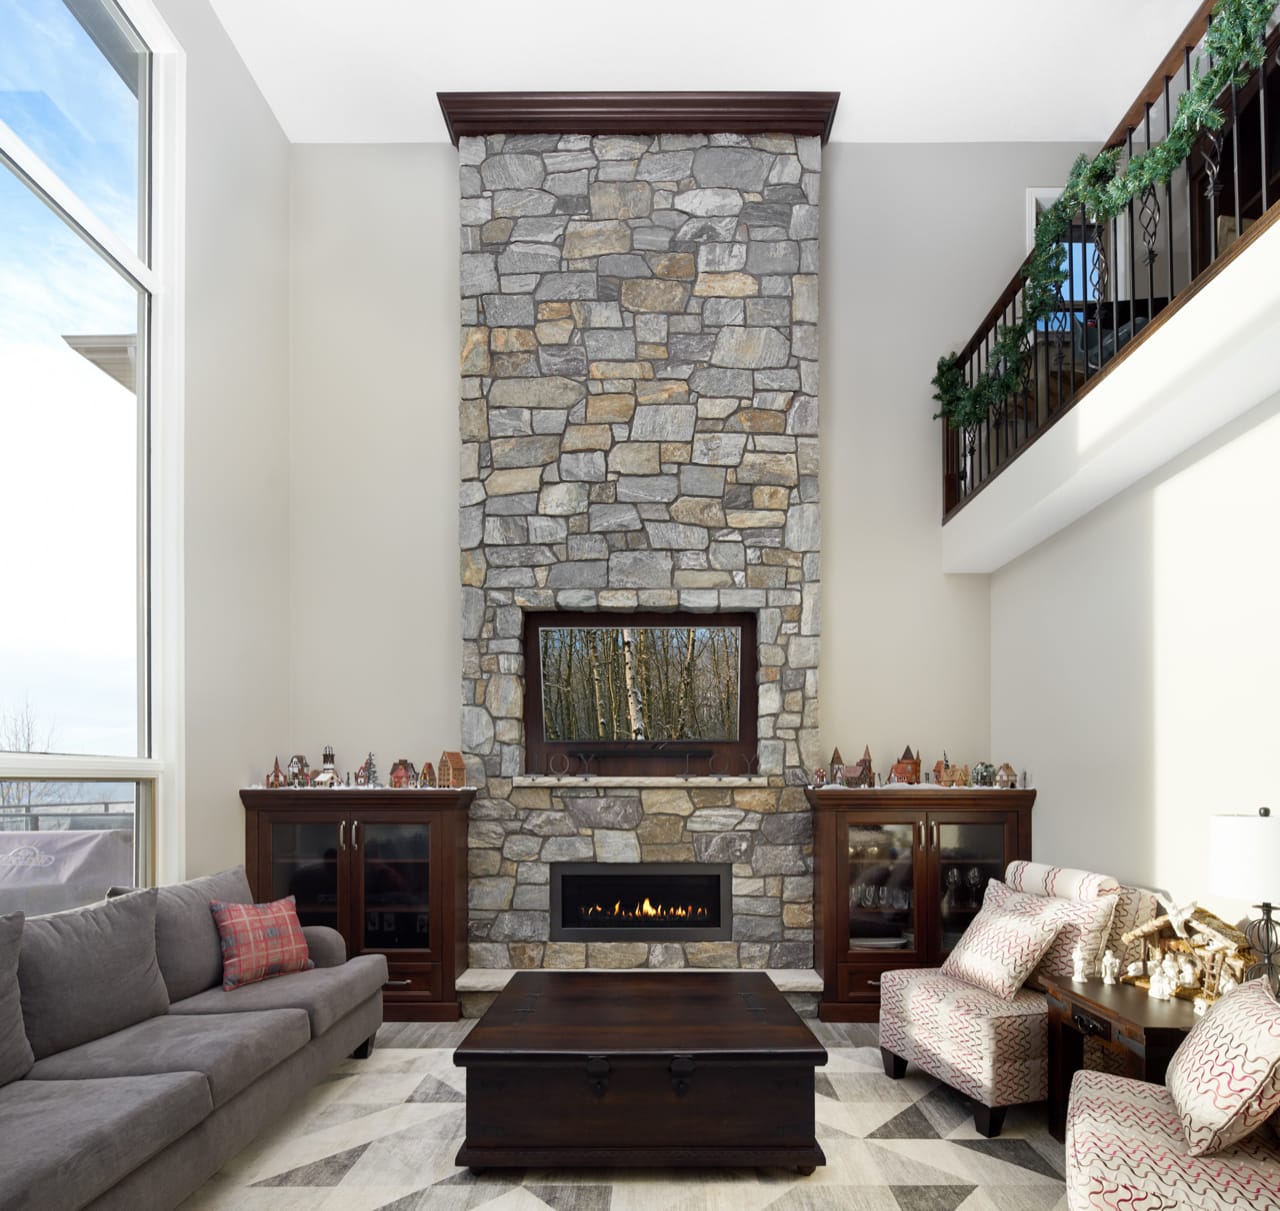 A family room with a tall river rock fireplace with dark brown cabinetry on either side.